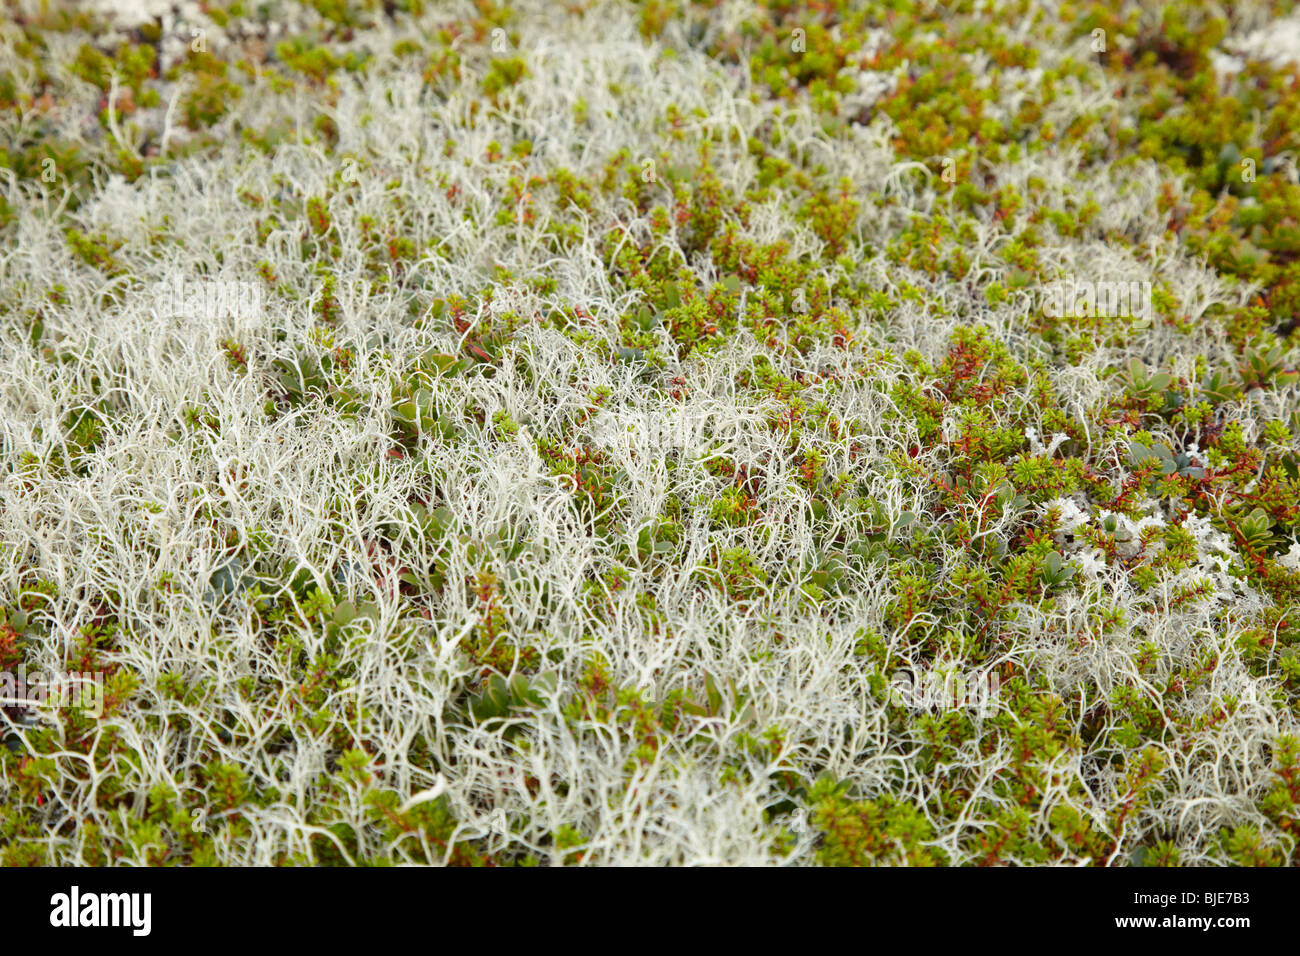 The surface of the ground covered by moss and lichen - northern tundra Stock Photo